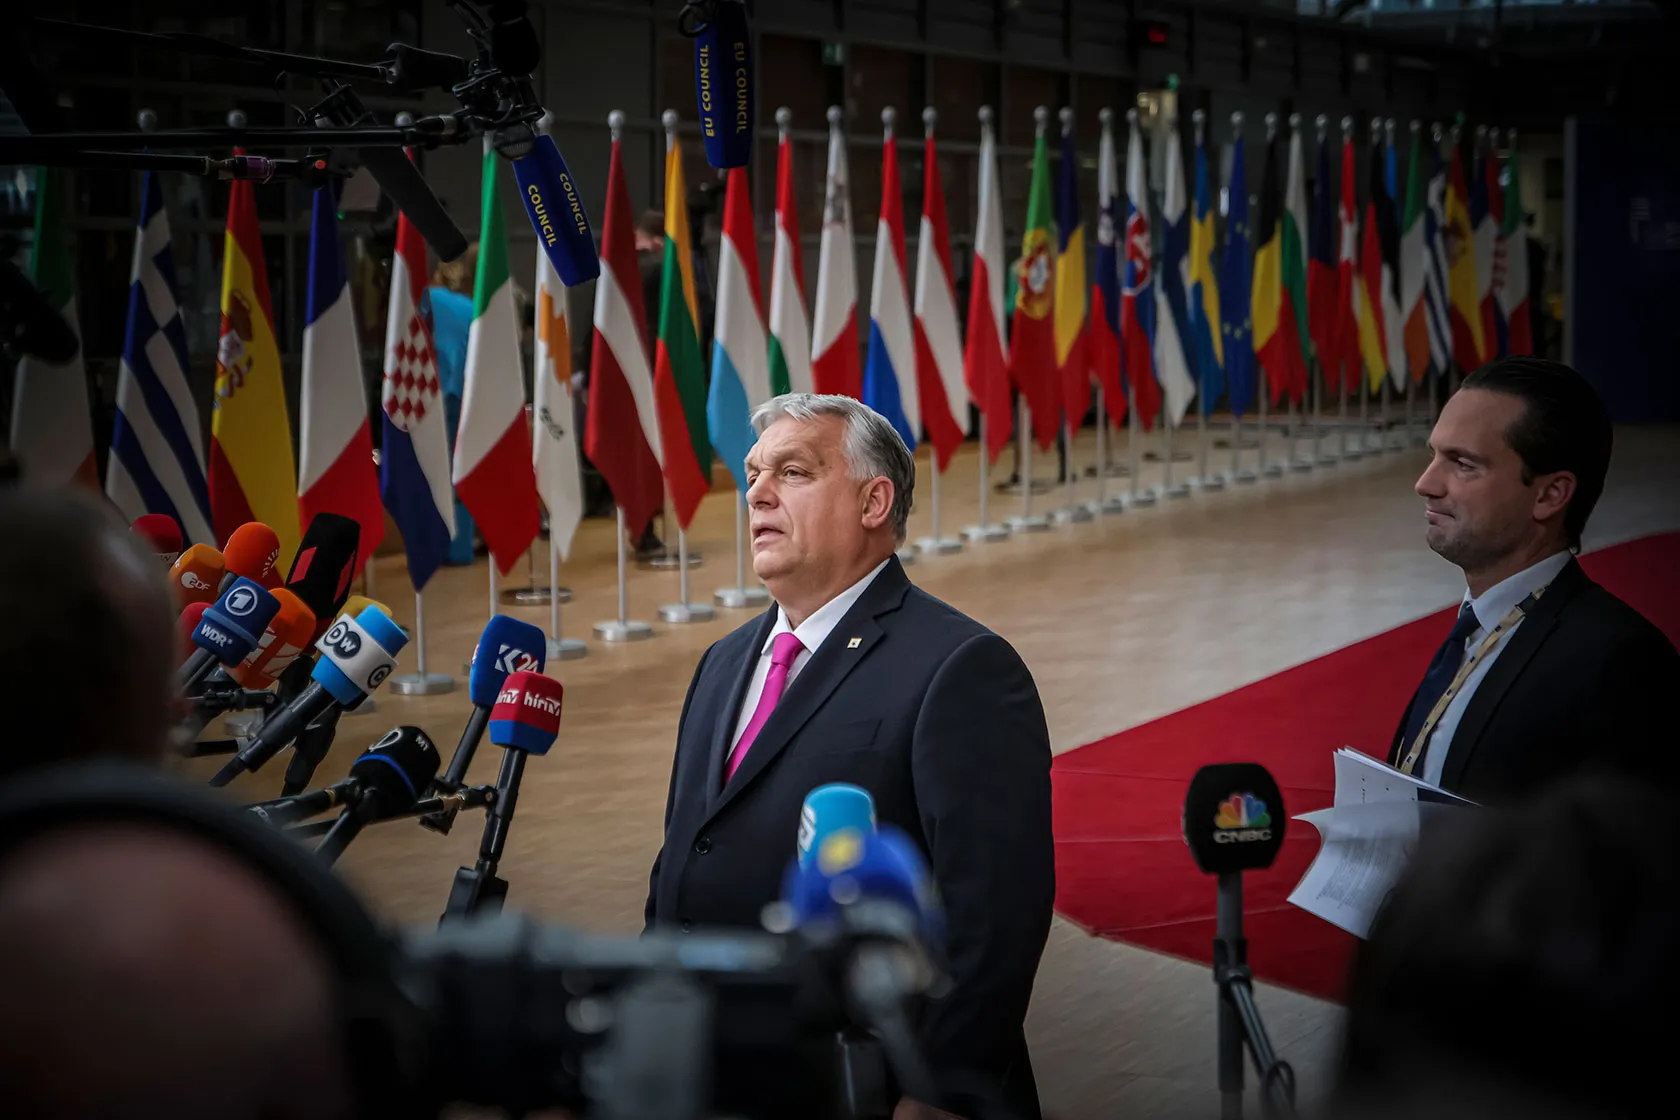 Hungarian Prime Minister Viktor Orbán gives a statement to the media after arriving at the European Council.